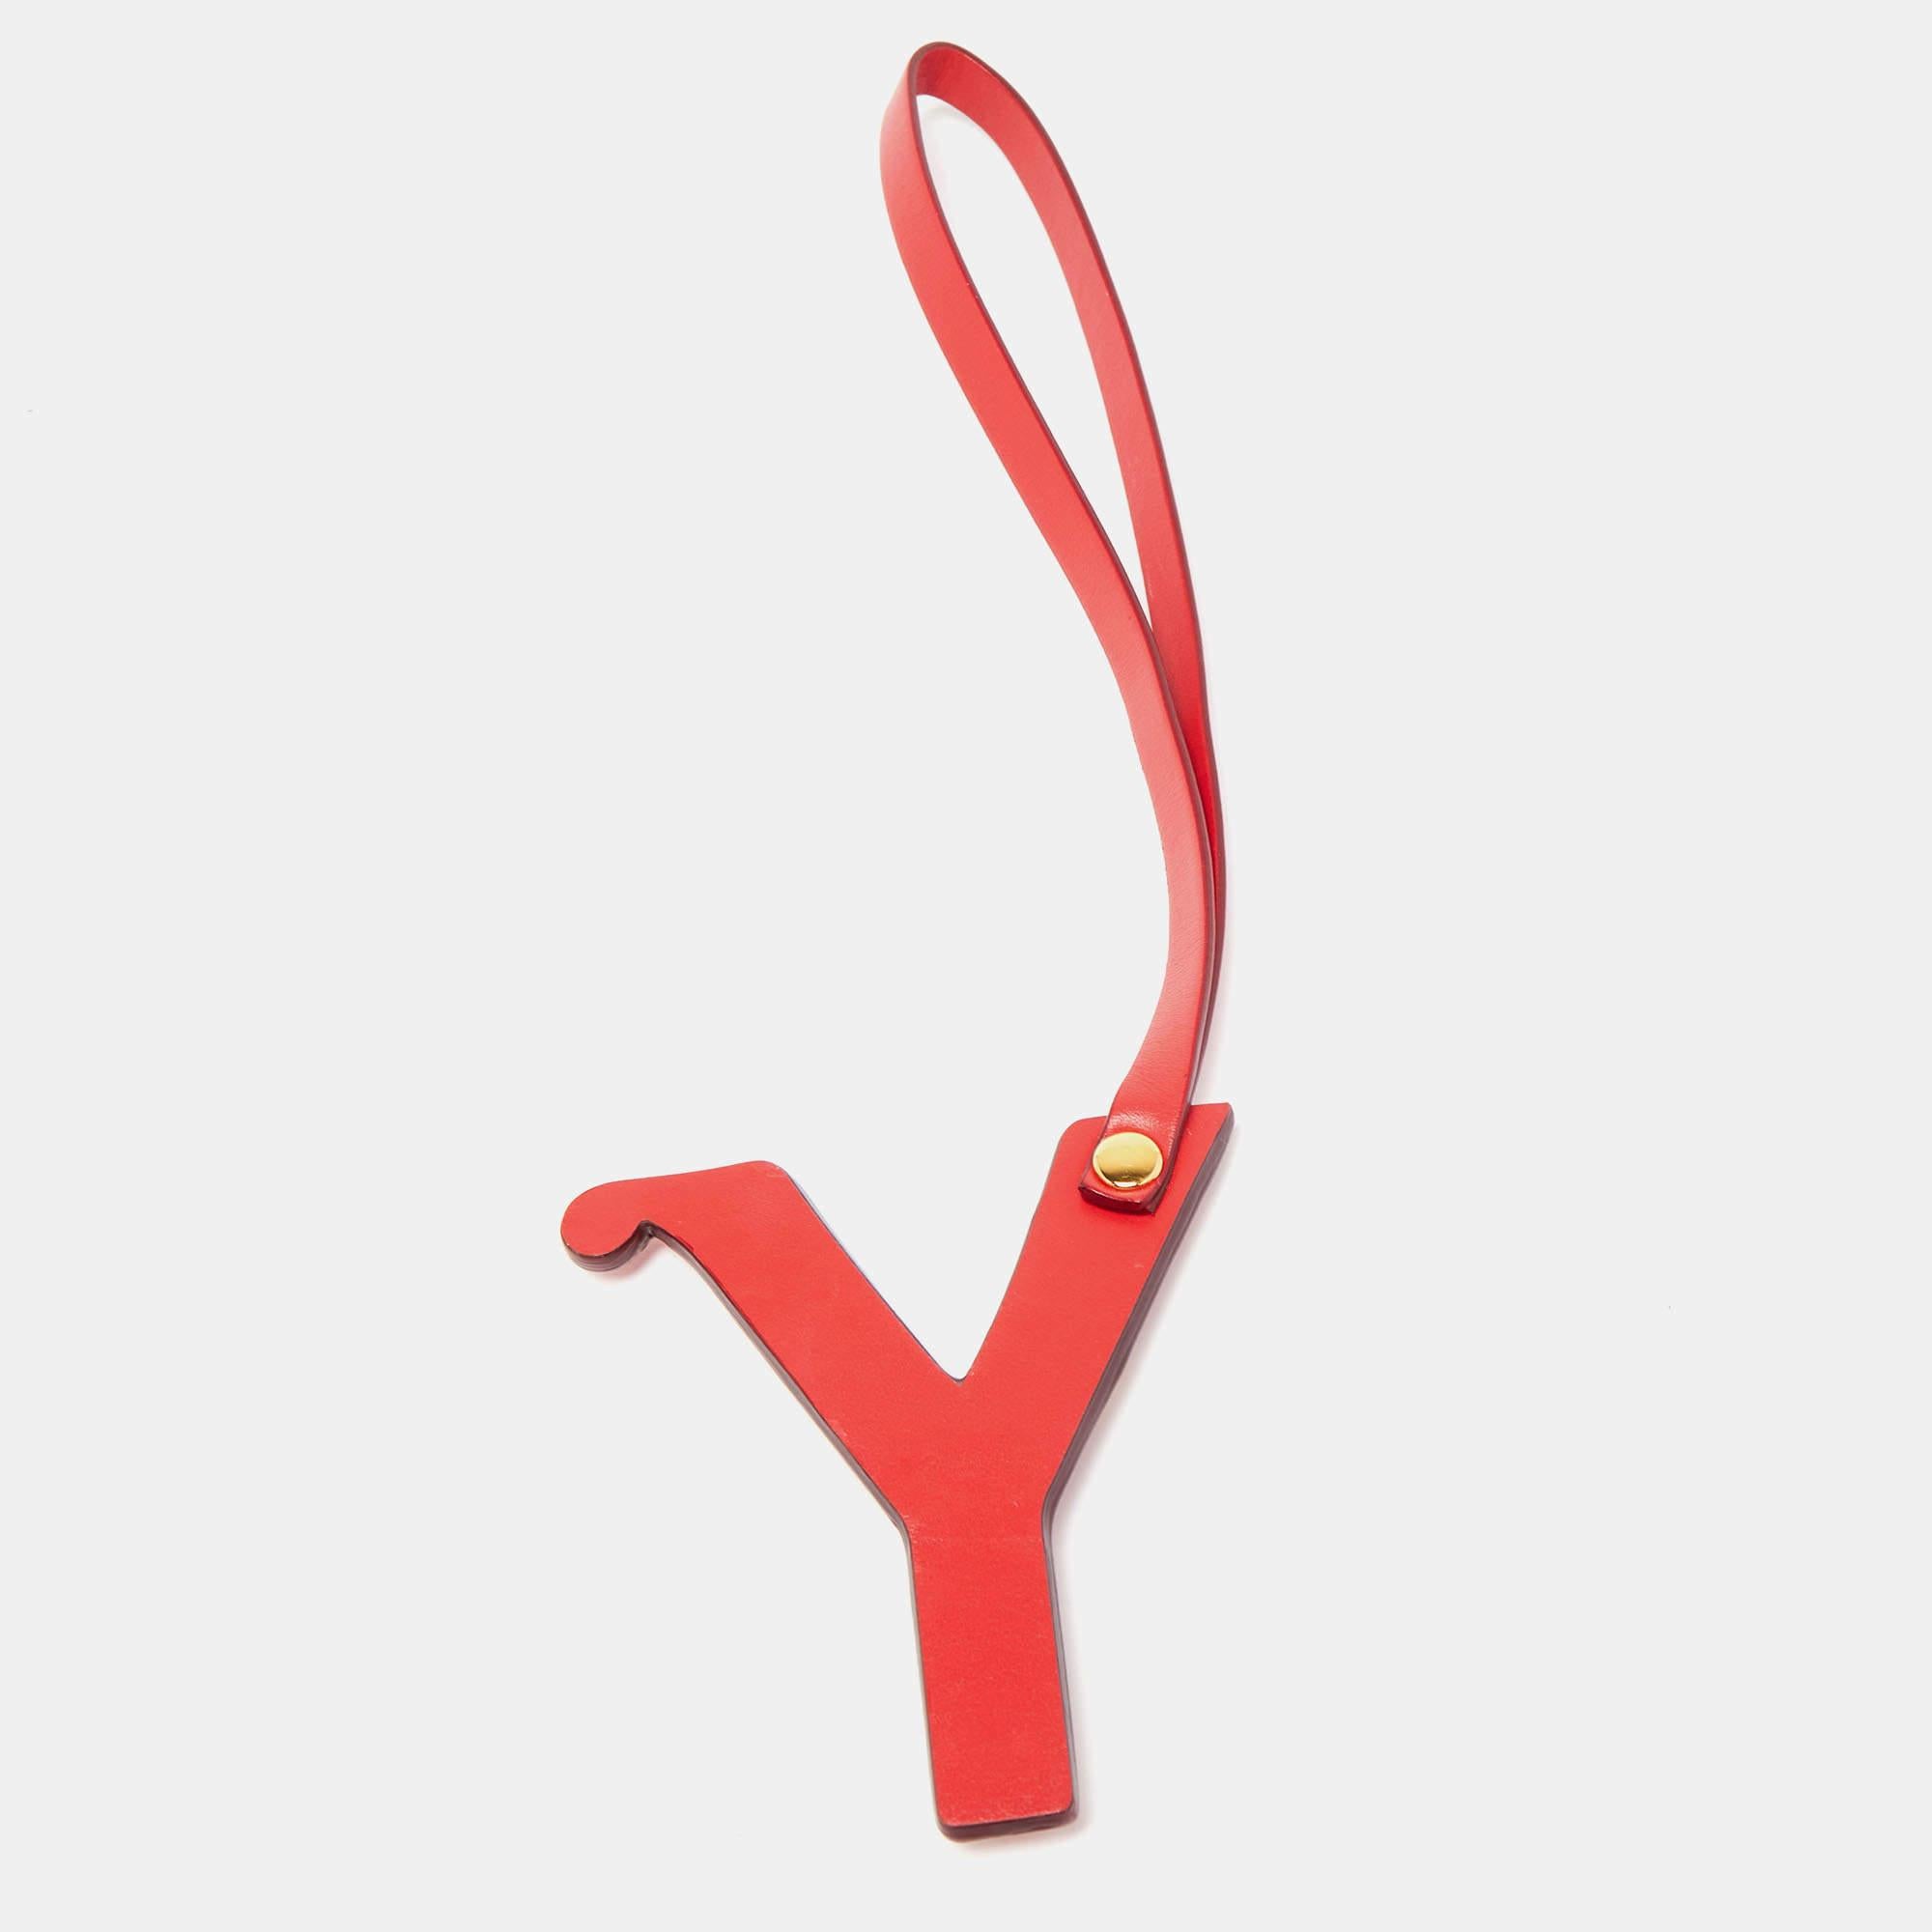 This stylish Hermes bag charm is made of leather as the letter 'Y'. It has gold-tone metal details on it and is accompanied by a matching strap.

Includes: Original Box

